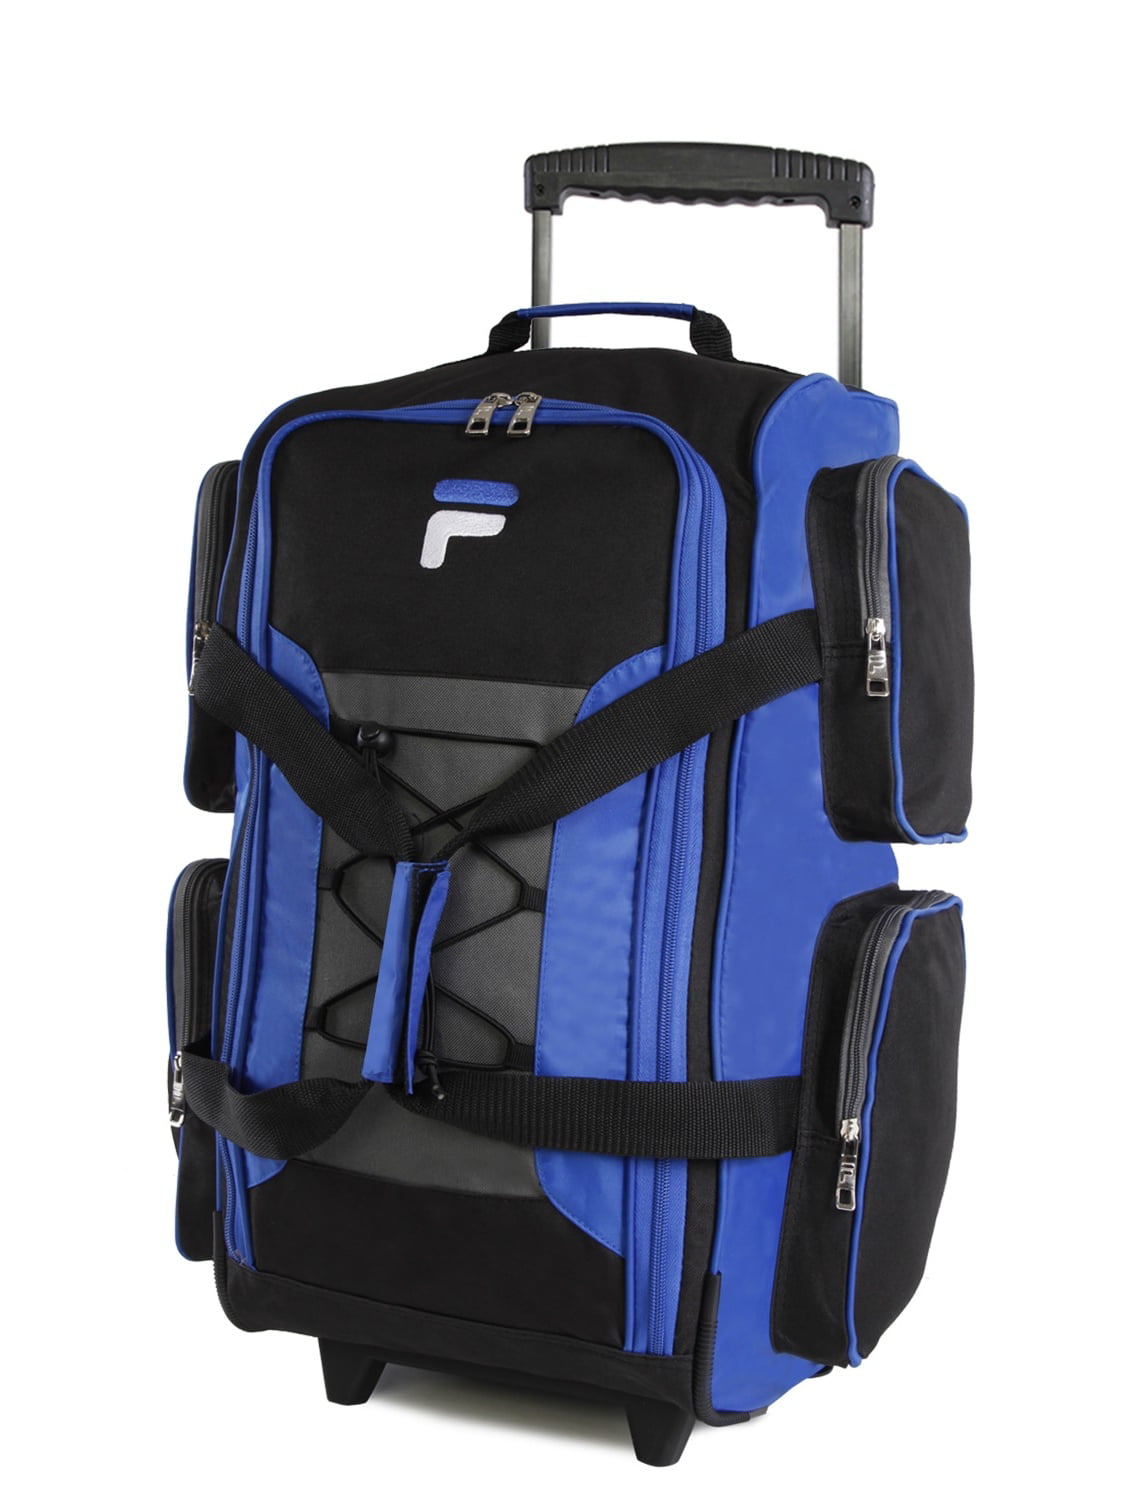 light travel bag with wheels